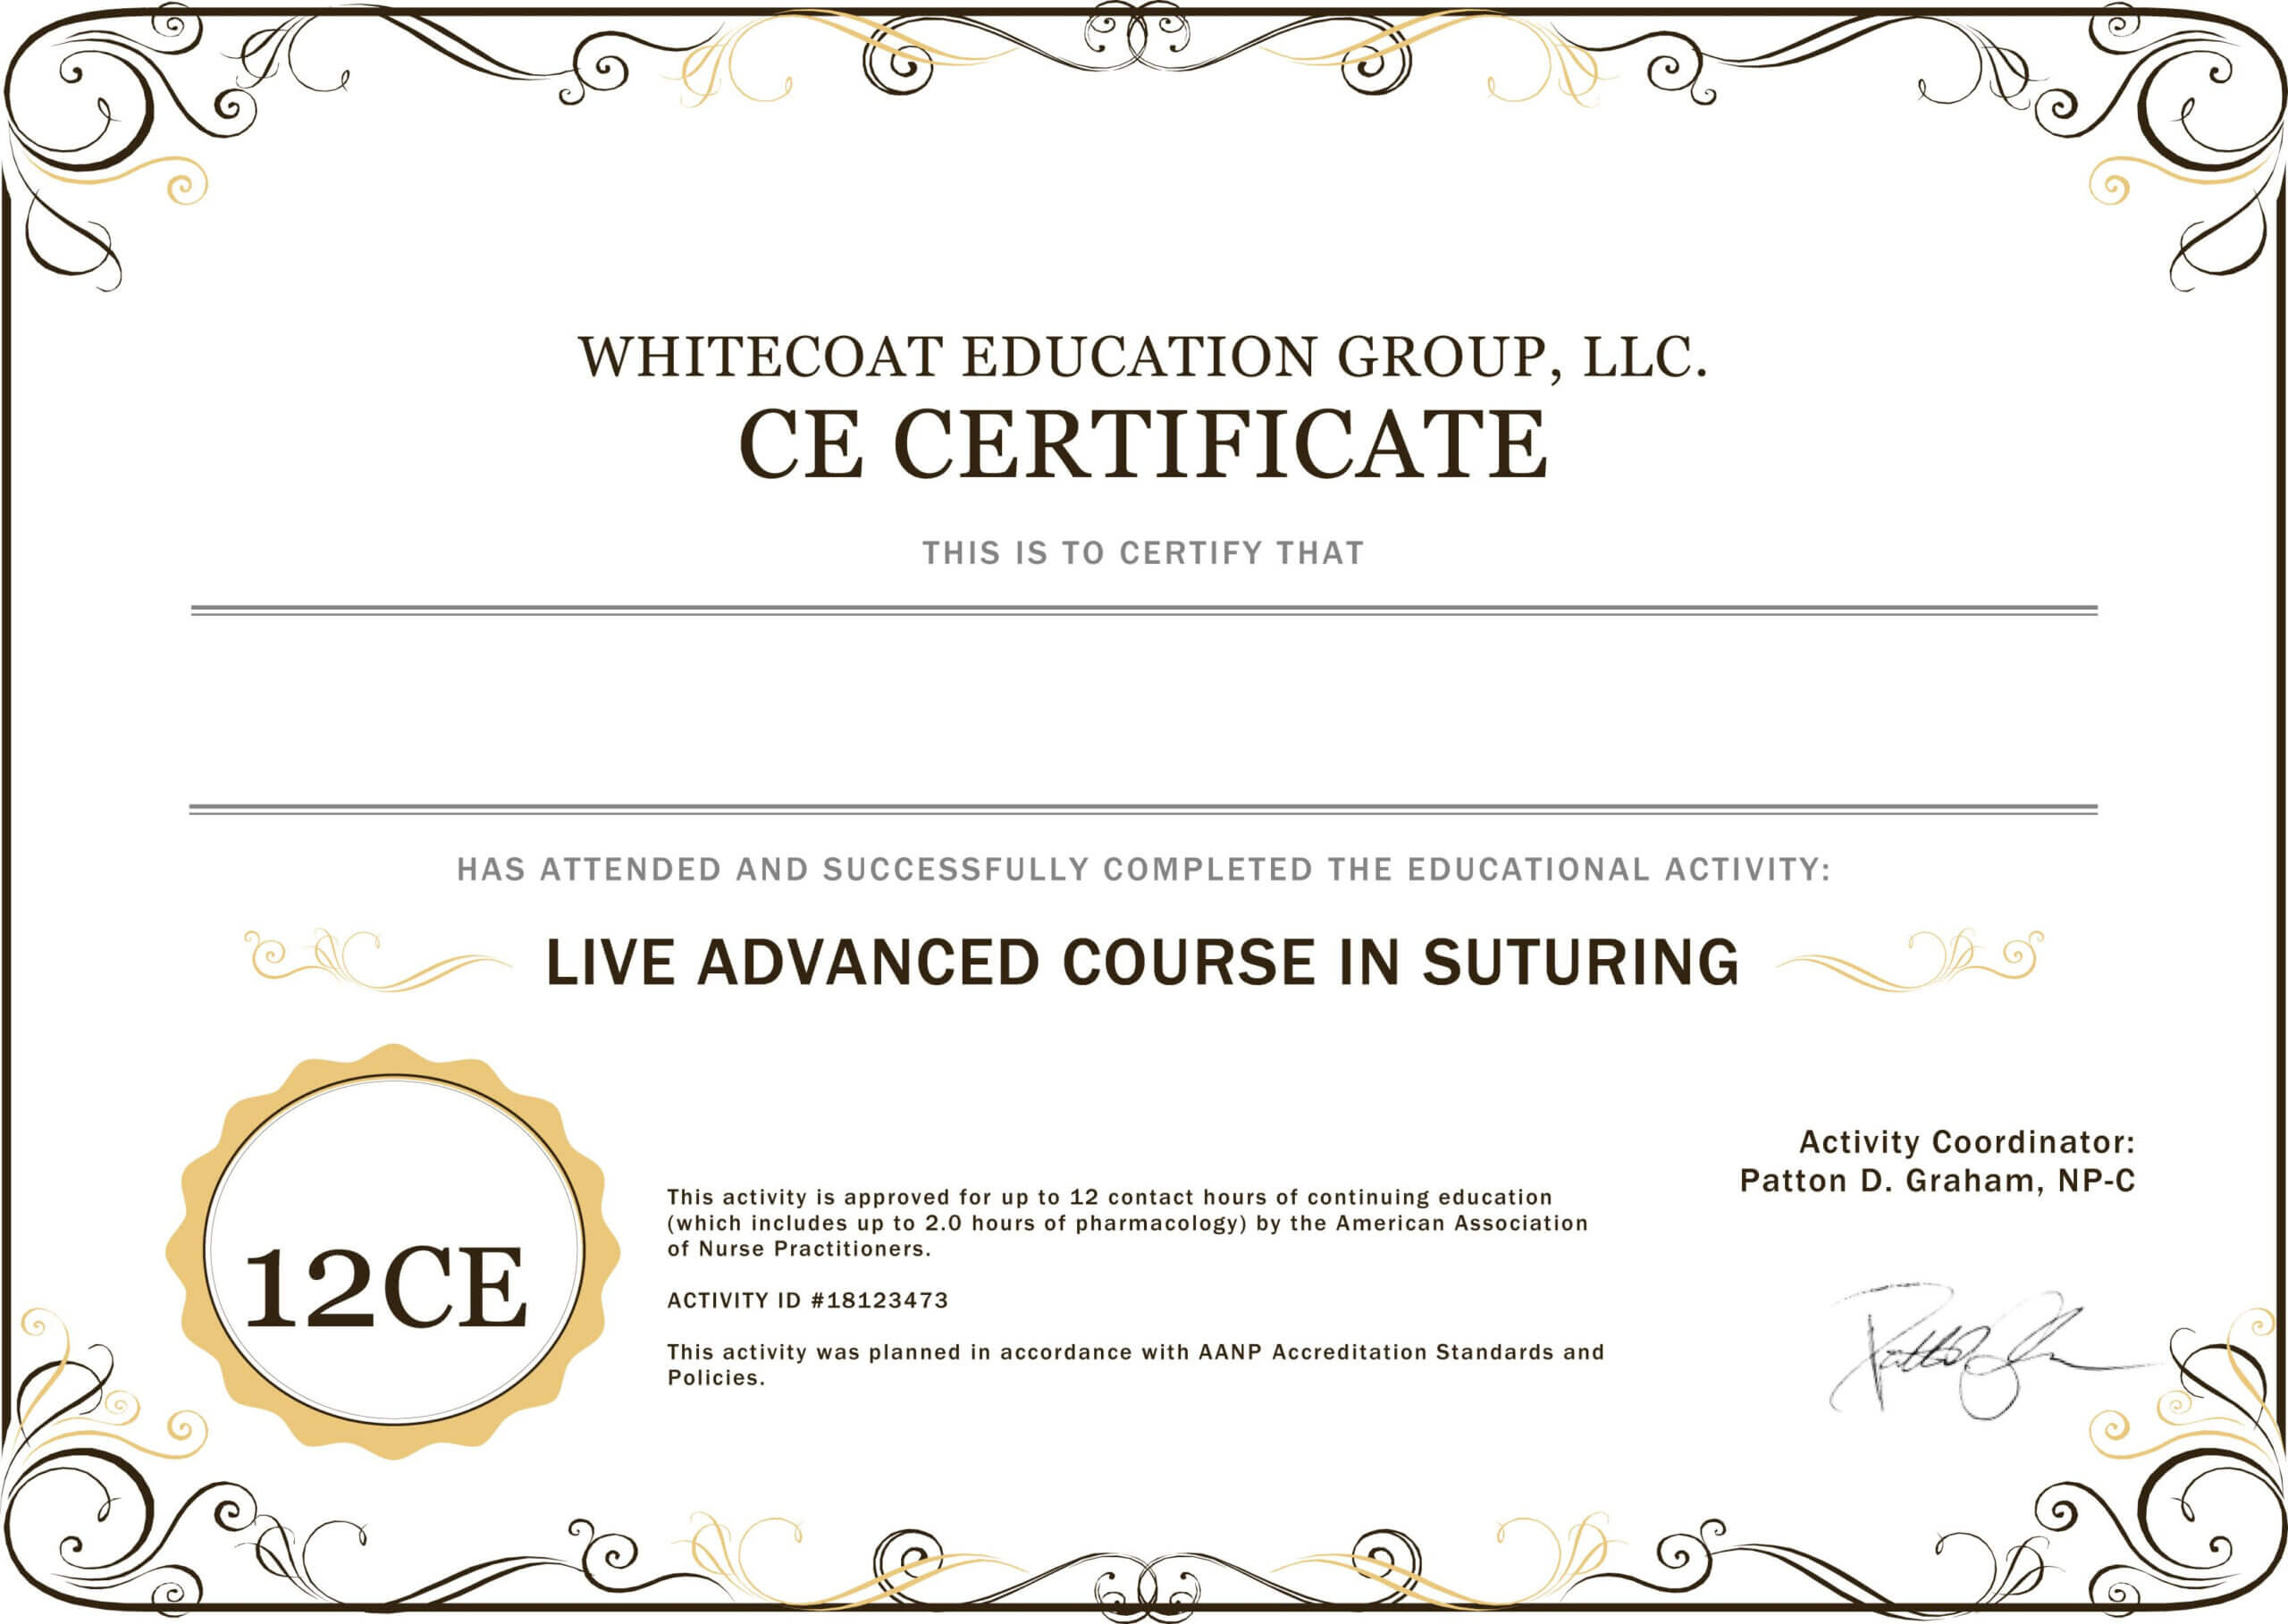 Ce Certificate Template Tomope zaribanks co For Continuing Education